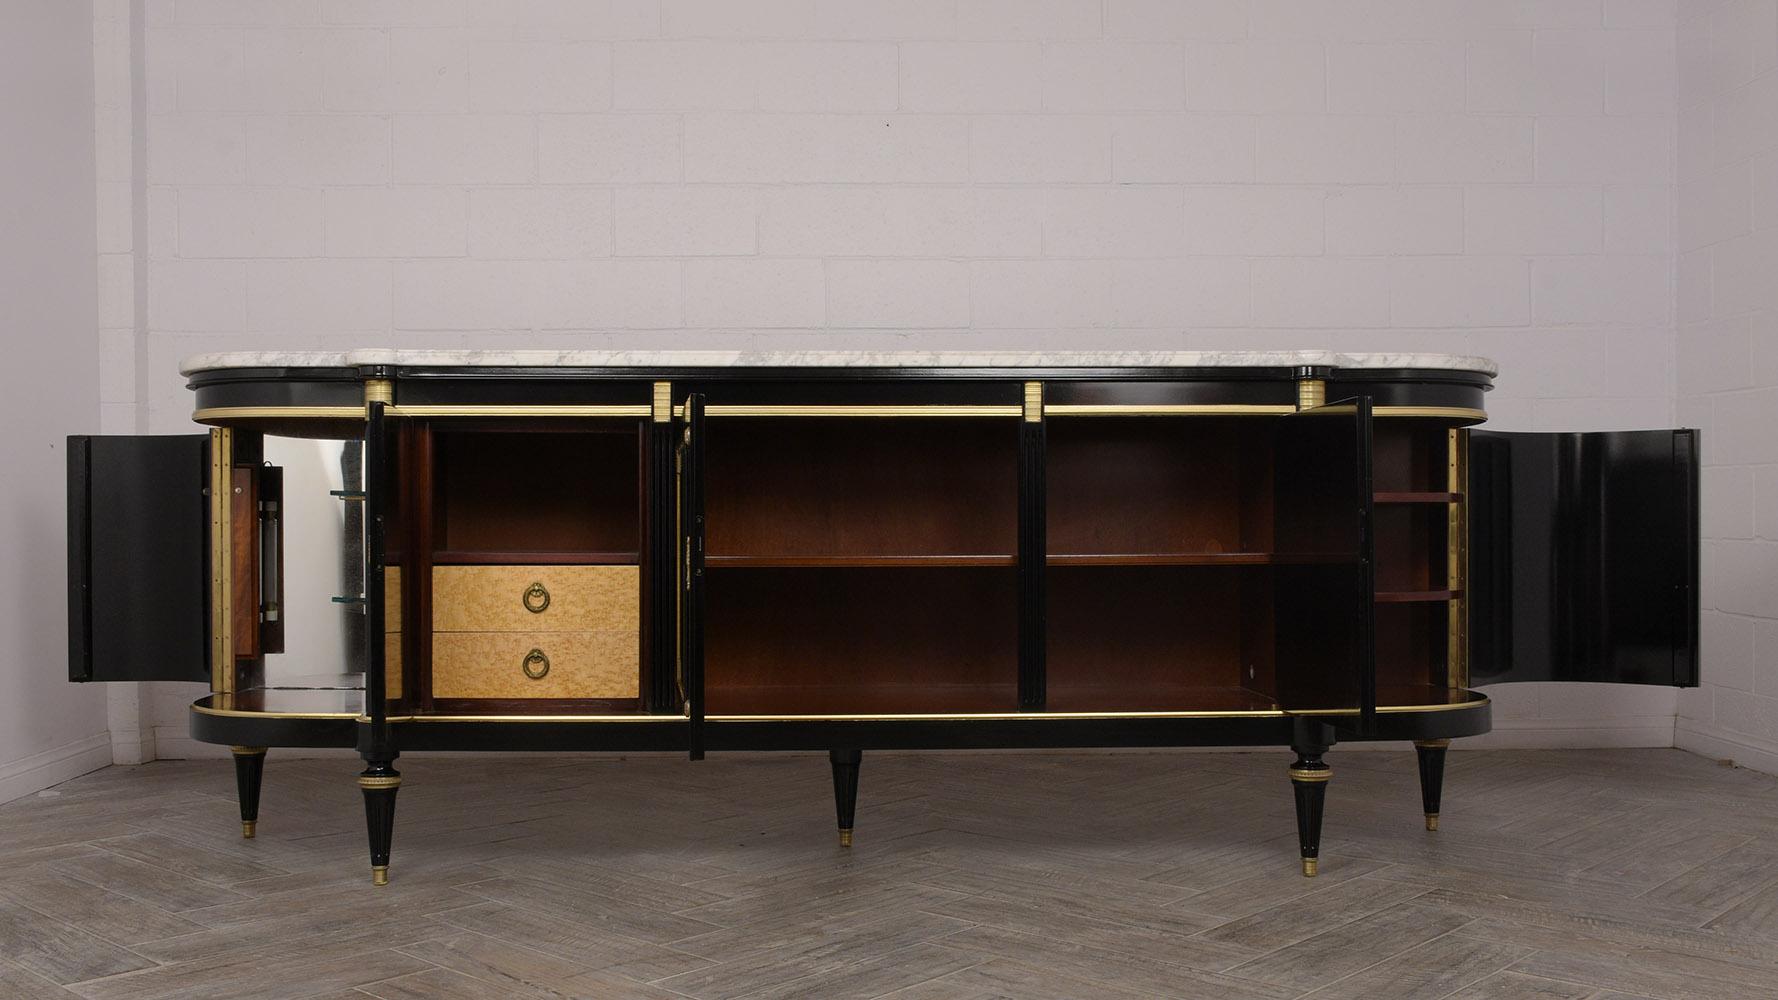 This 1930s French Louis XVI style buffet is made of mahogany wood with an ebonized and lacquered finish. The buffet is topped with a white Carrara and grey vines marble that follows the shape of the buffet and has beveled edges. There are five